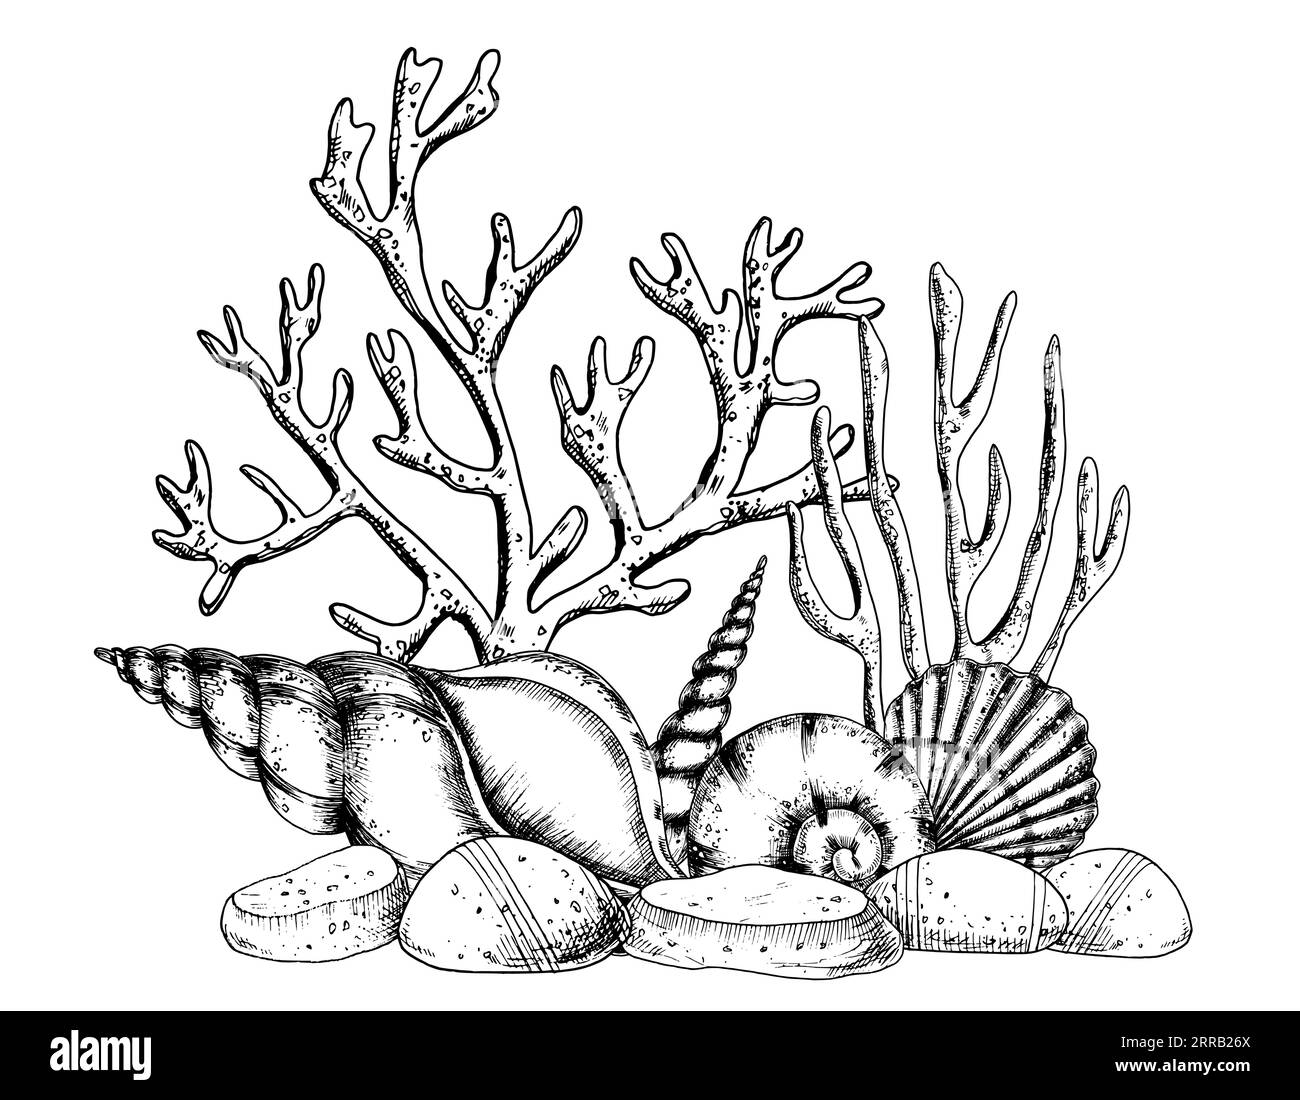 Underwater engraved composition with Seashells and Corals on isolated background. Hand drawn vector illustration of Seaweeds and seabed. Drawing of undersea in line art style painted by black inks. Stock Vector